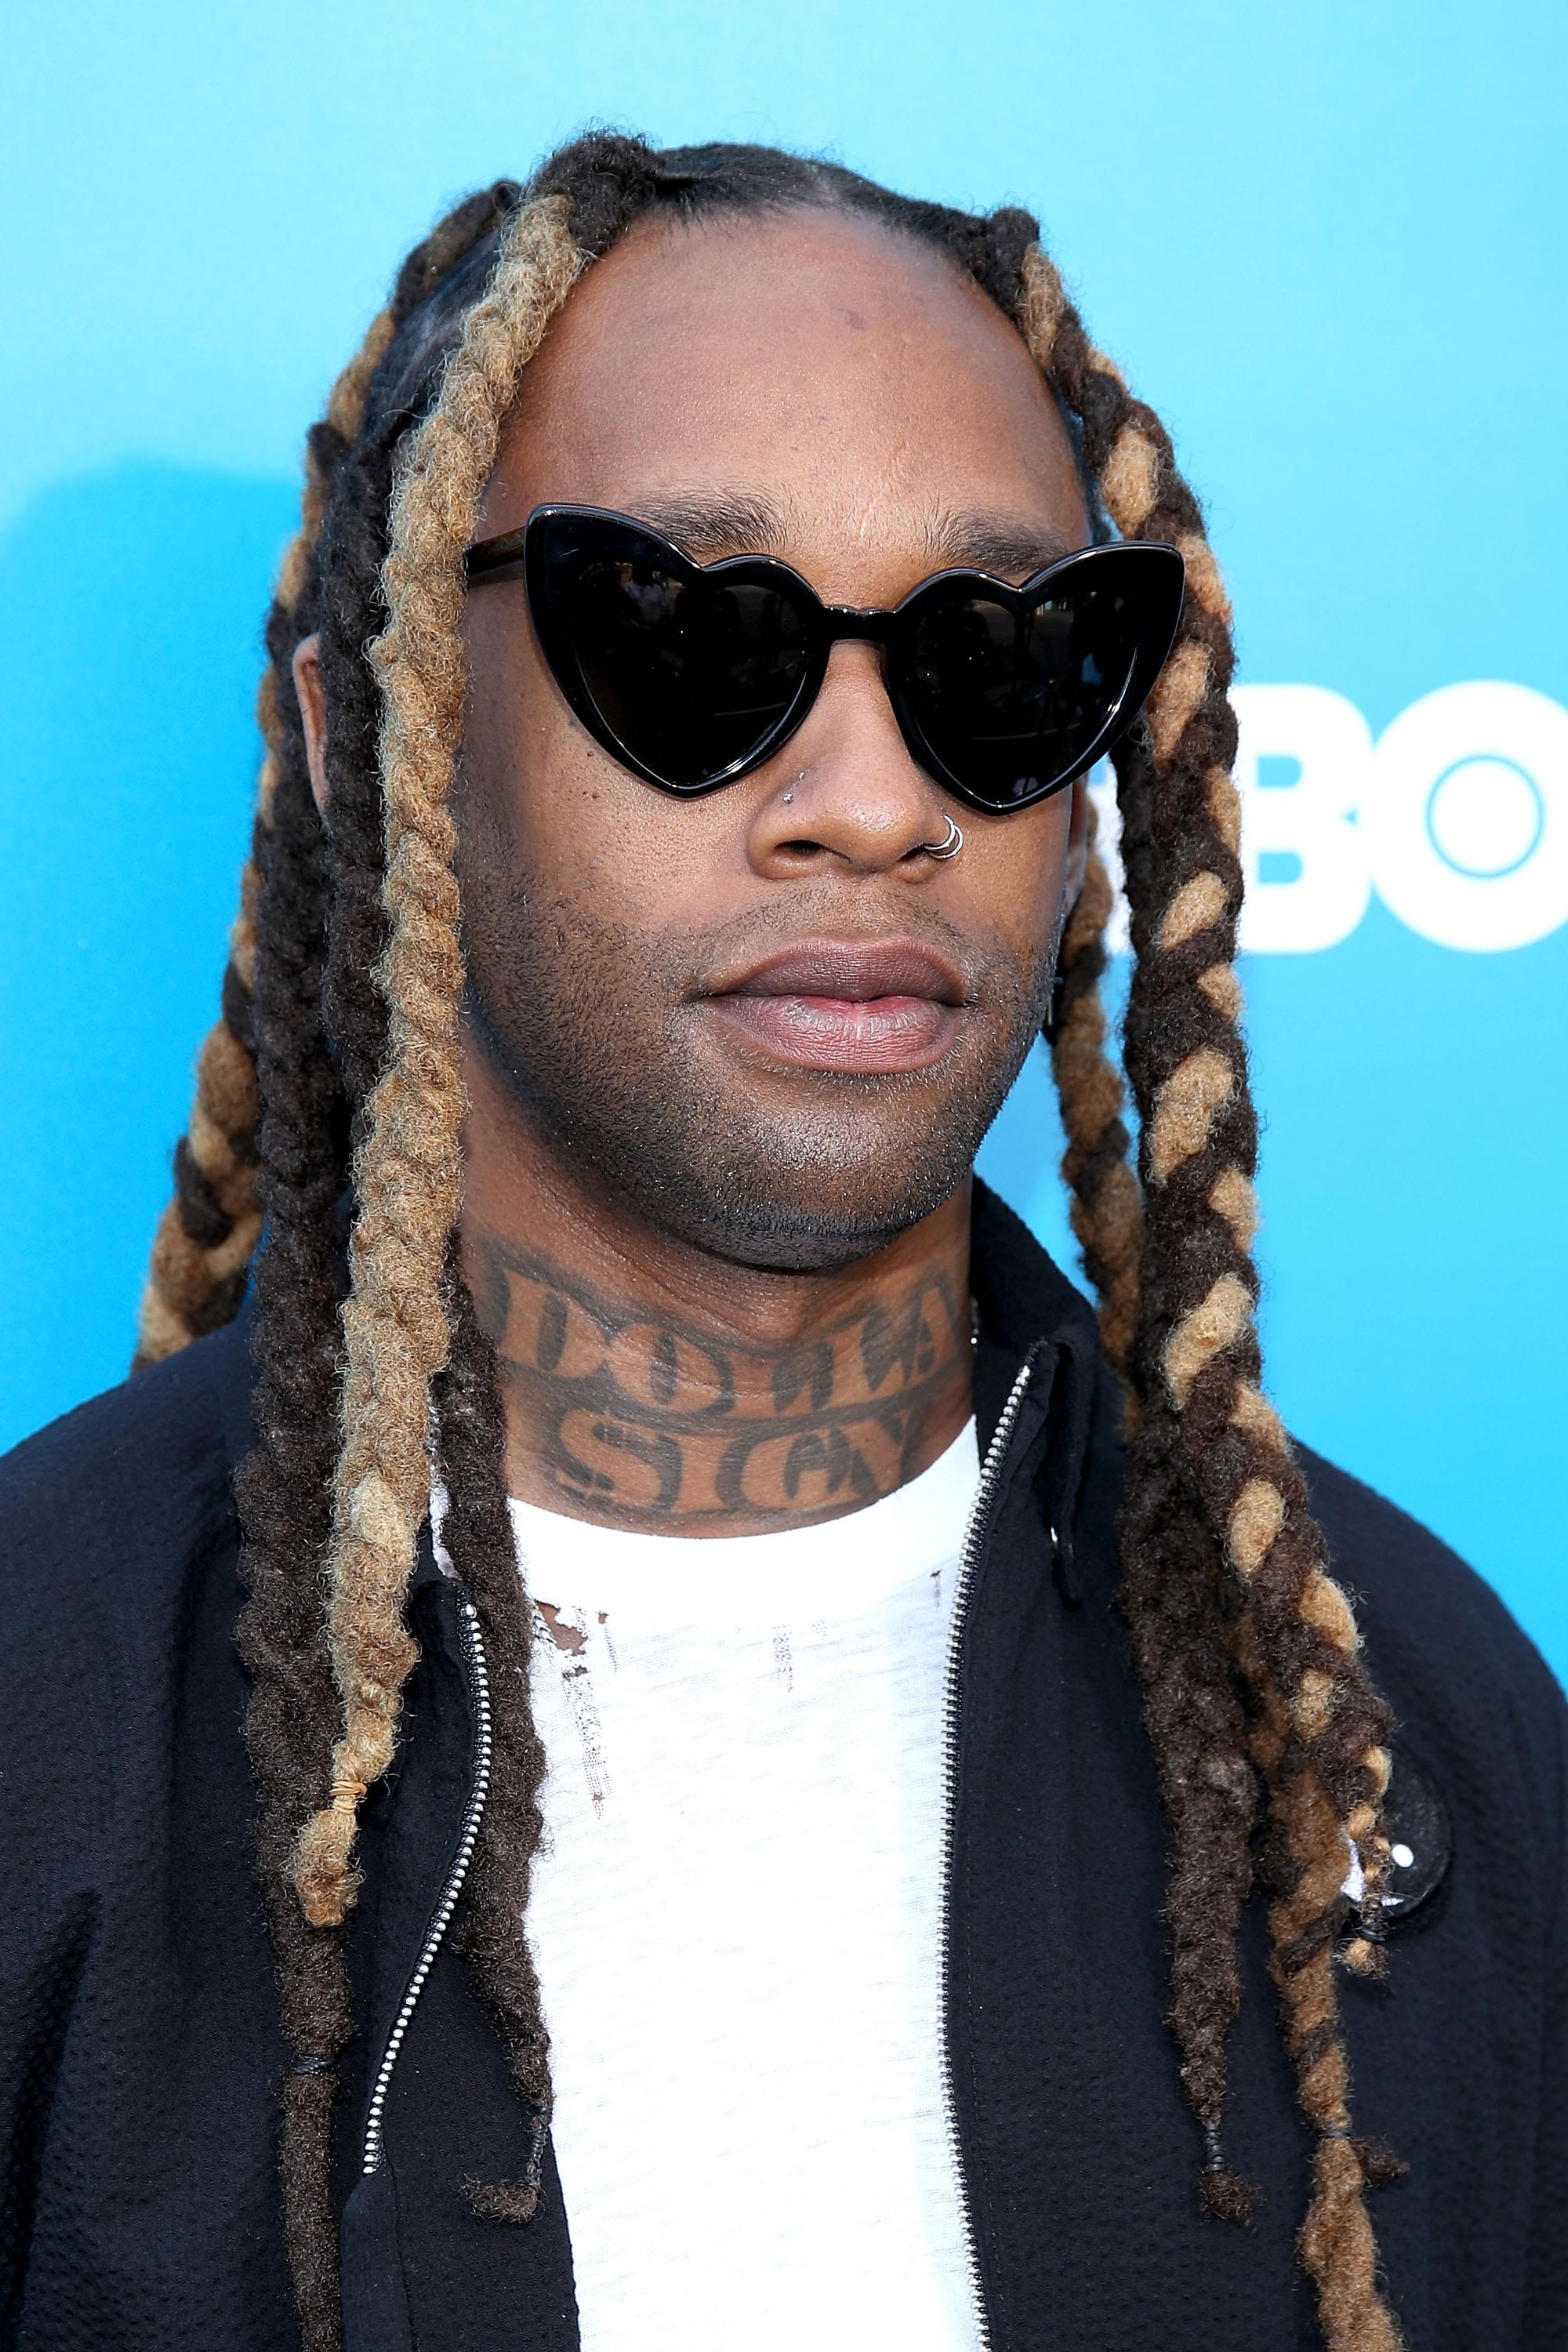 Ty Dolla $ign Shares New Single “So Am I” Featuring Damian Marley & Skrillex [LISTEN]